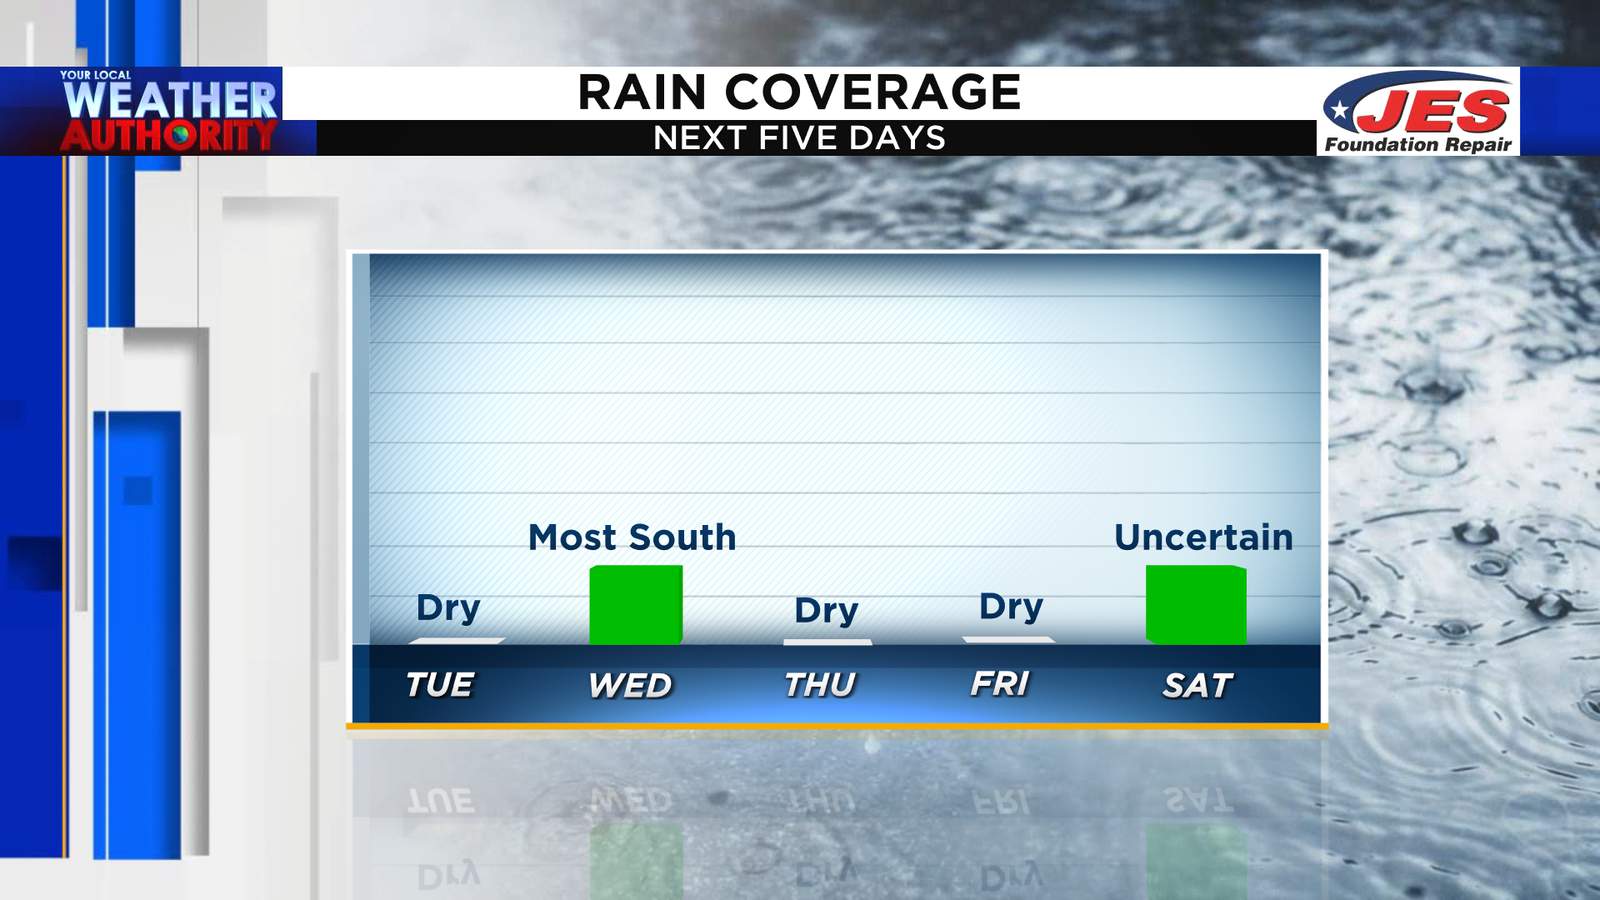 It’s about time! Stretch of (mostly) dry weather takes us through the week